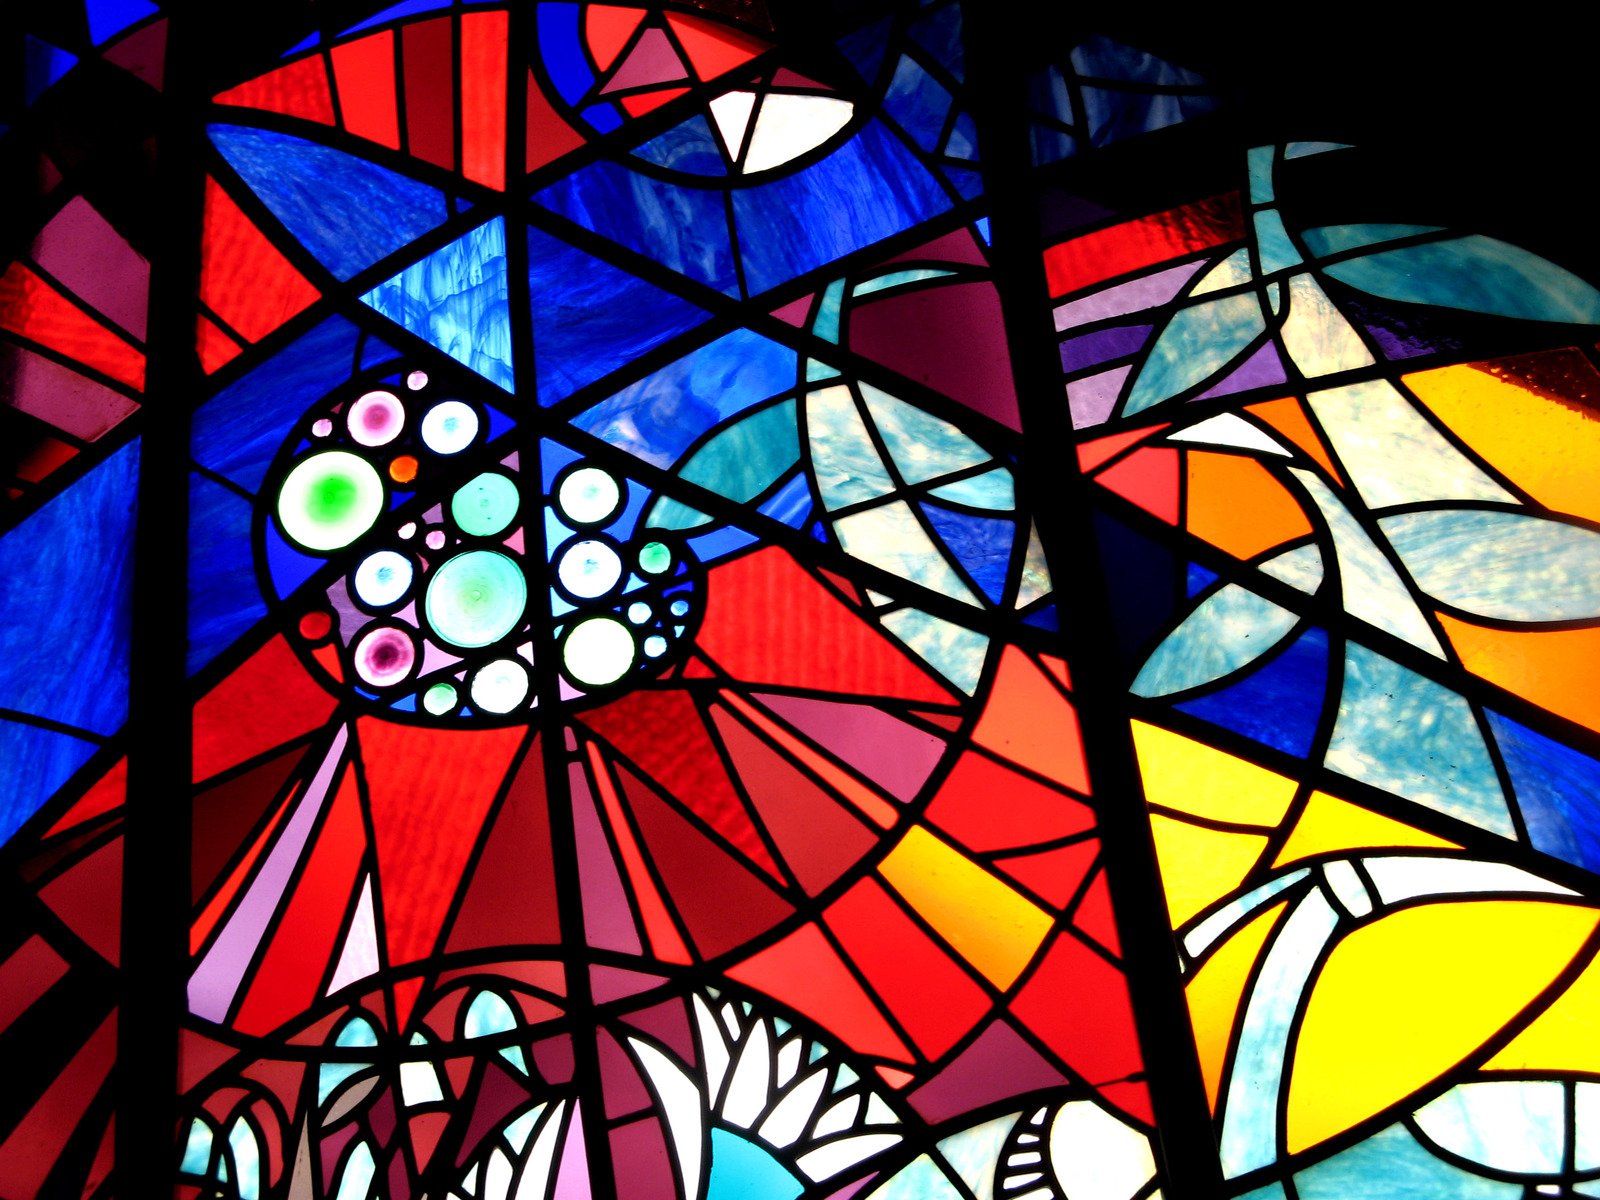 a close up of a stained glass window in a building